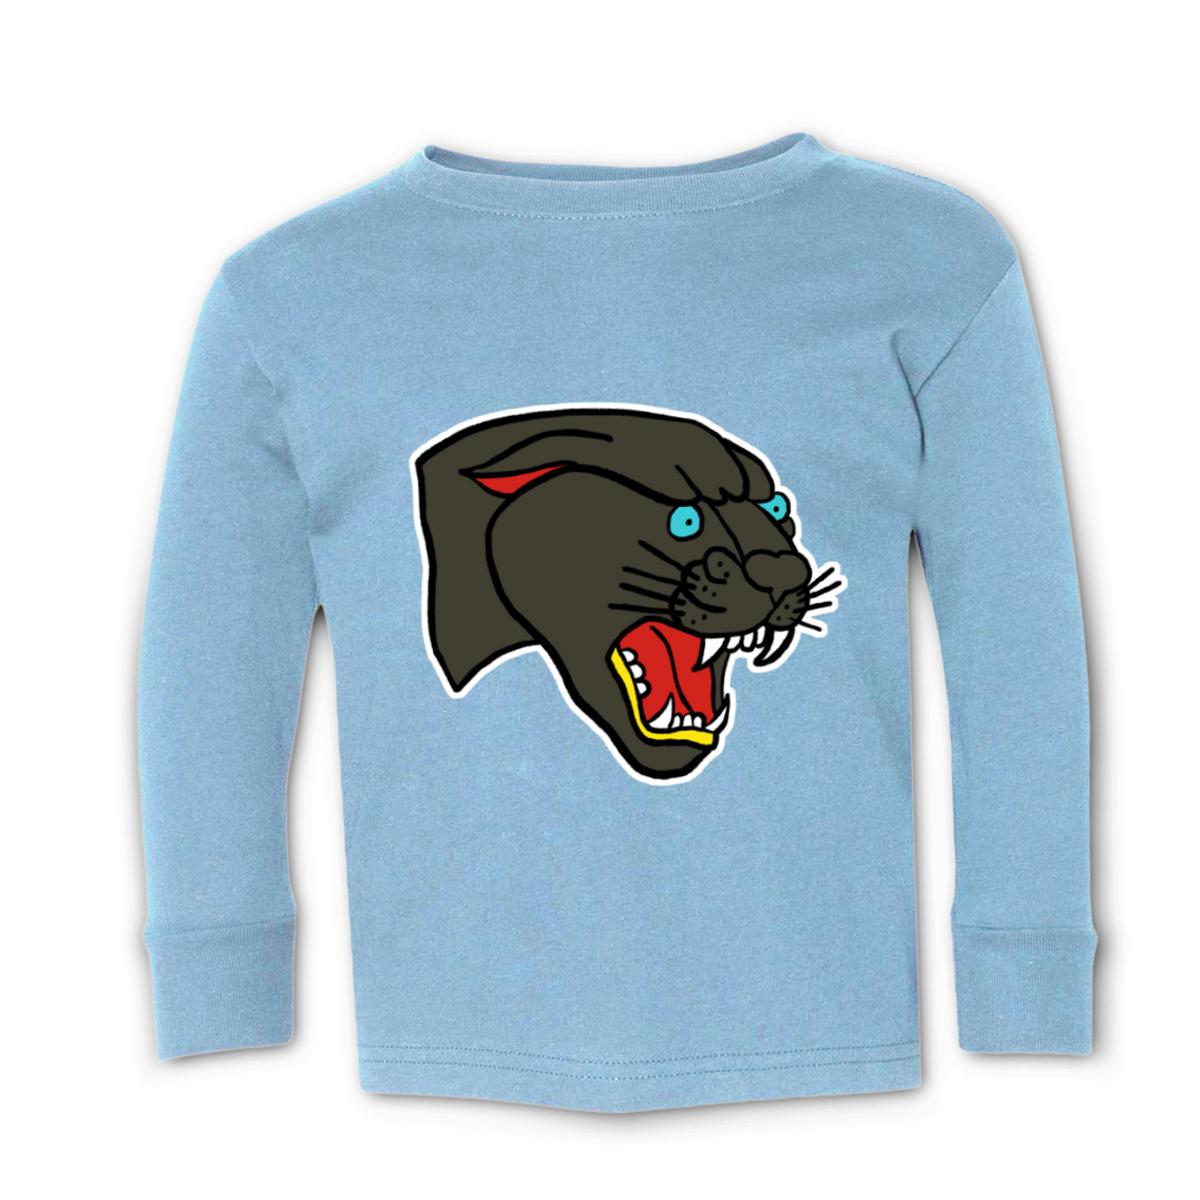 American Traditional Panther Kid's Long Sleeve Tee Large light-blue